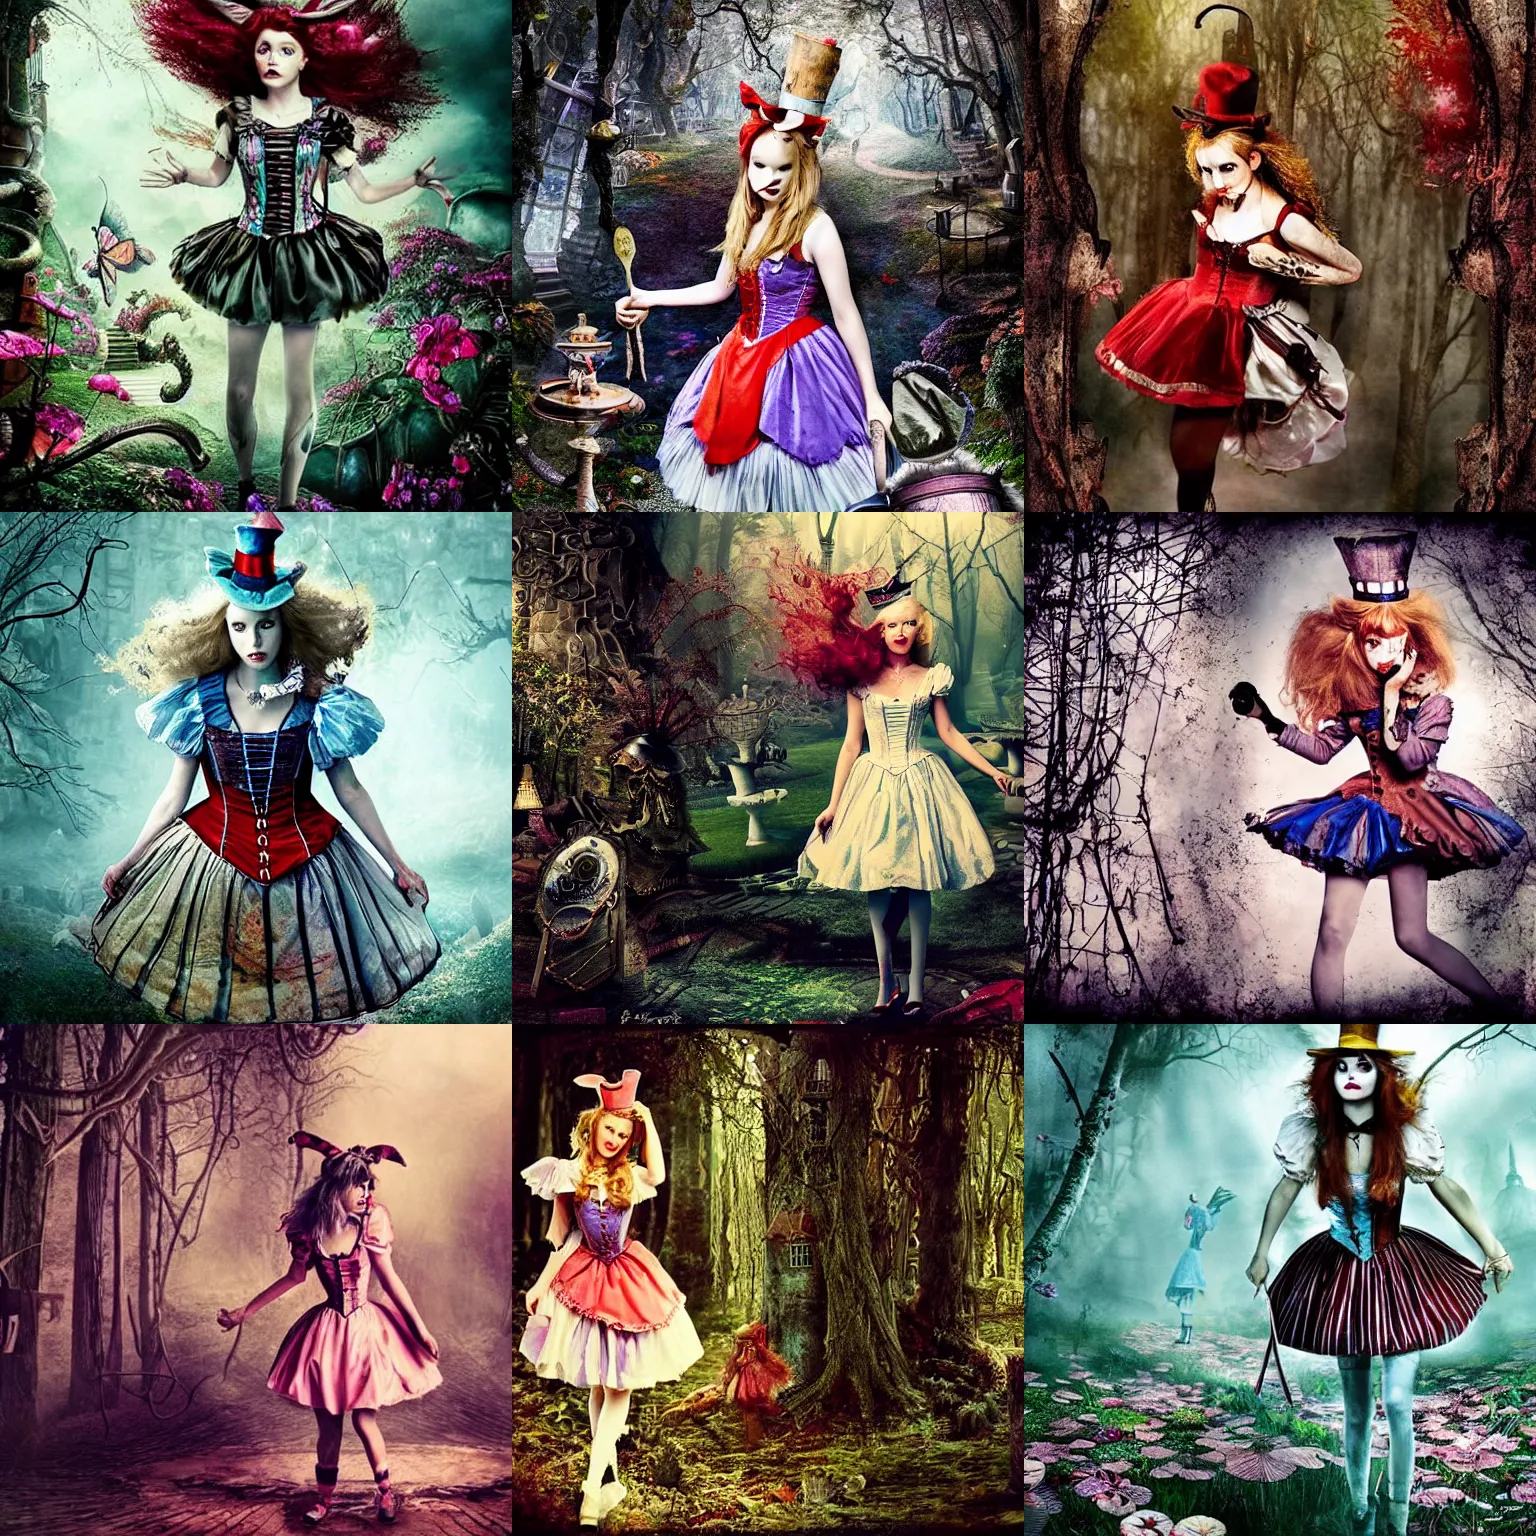 Prompt: < photo hd stunning gritty reimagined > alice in wonderland < / photo >